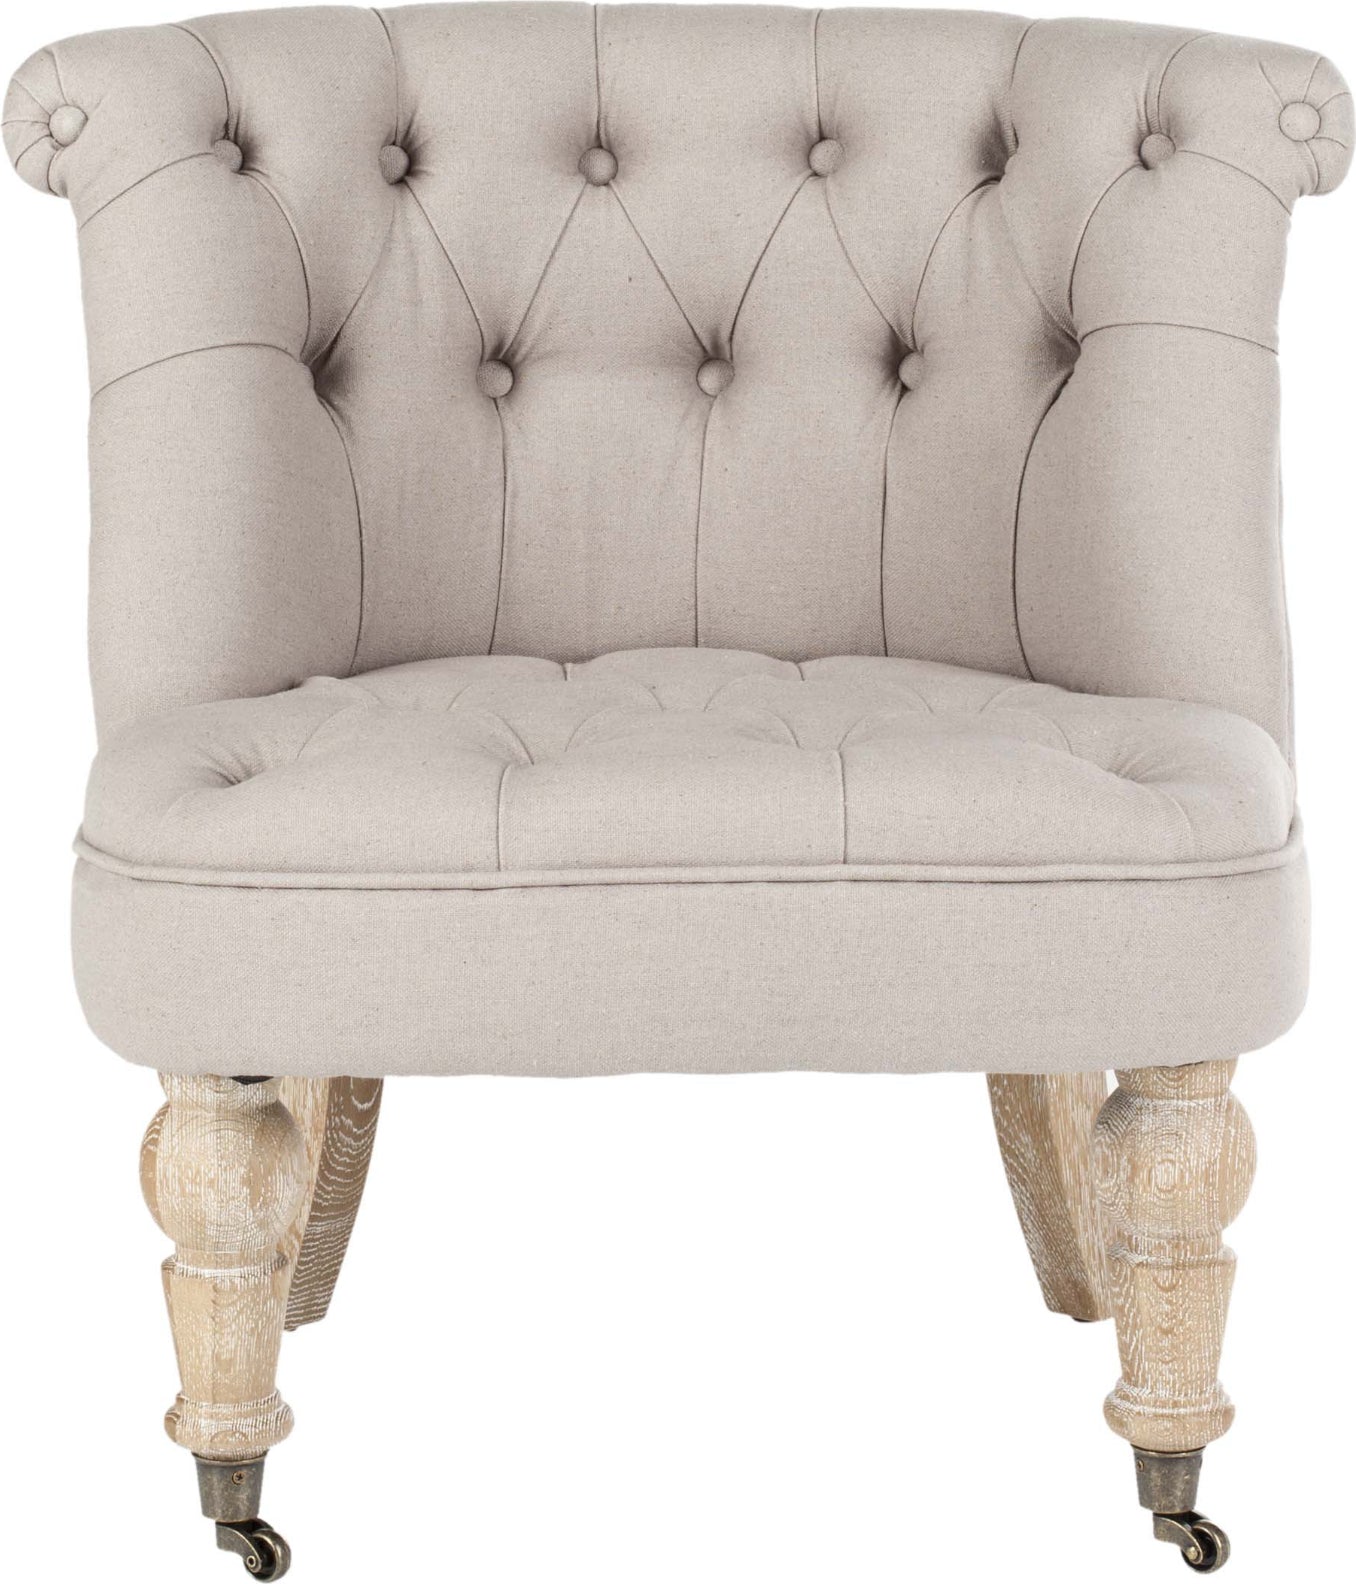 Safavieh Baby Tufted Chair Taupe and White Wash Furniture main image